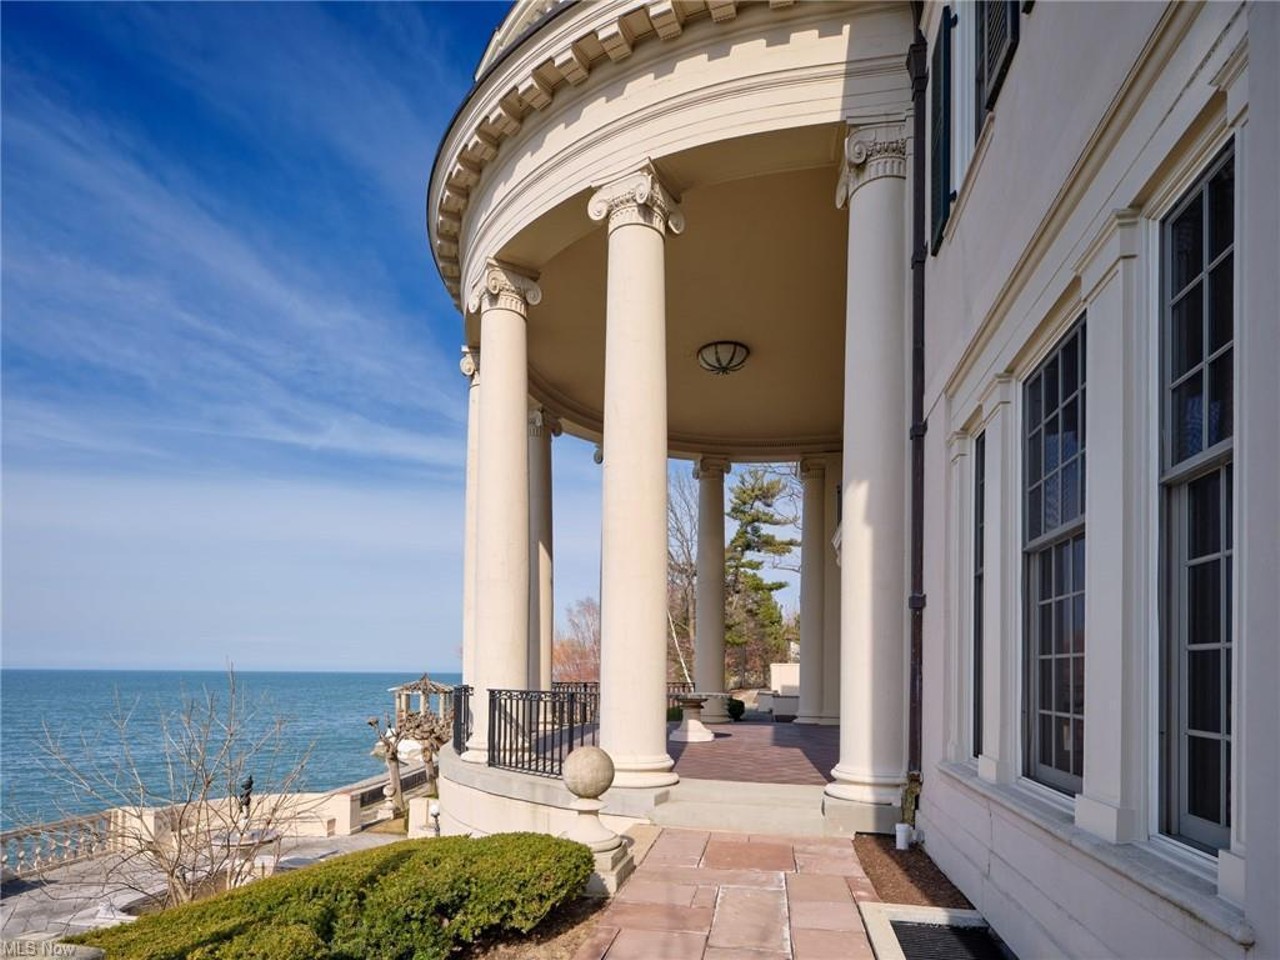 This Sprawling Cleveland Estate Built by William Mather With a Nod to the White House Is Now On the Market for $6.5 Million